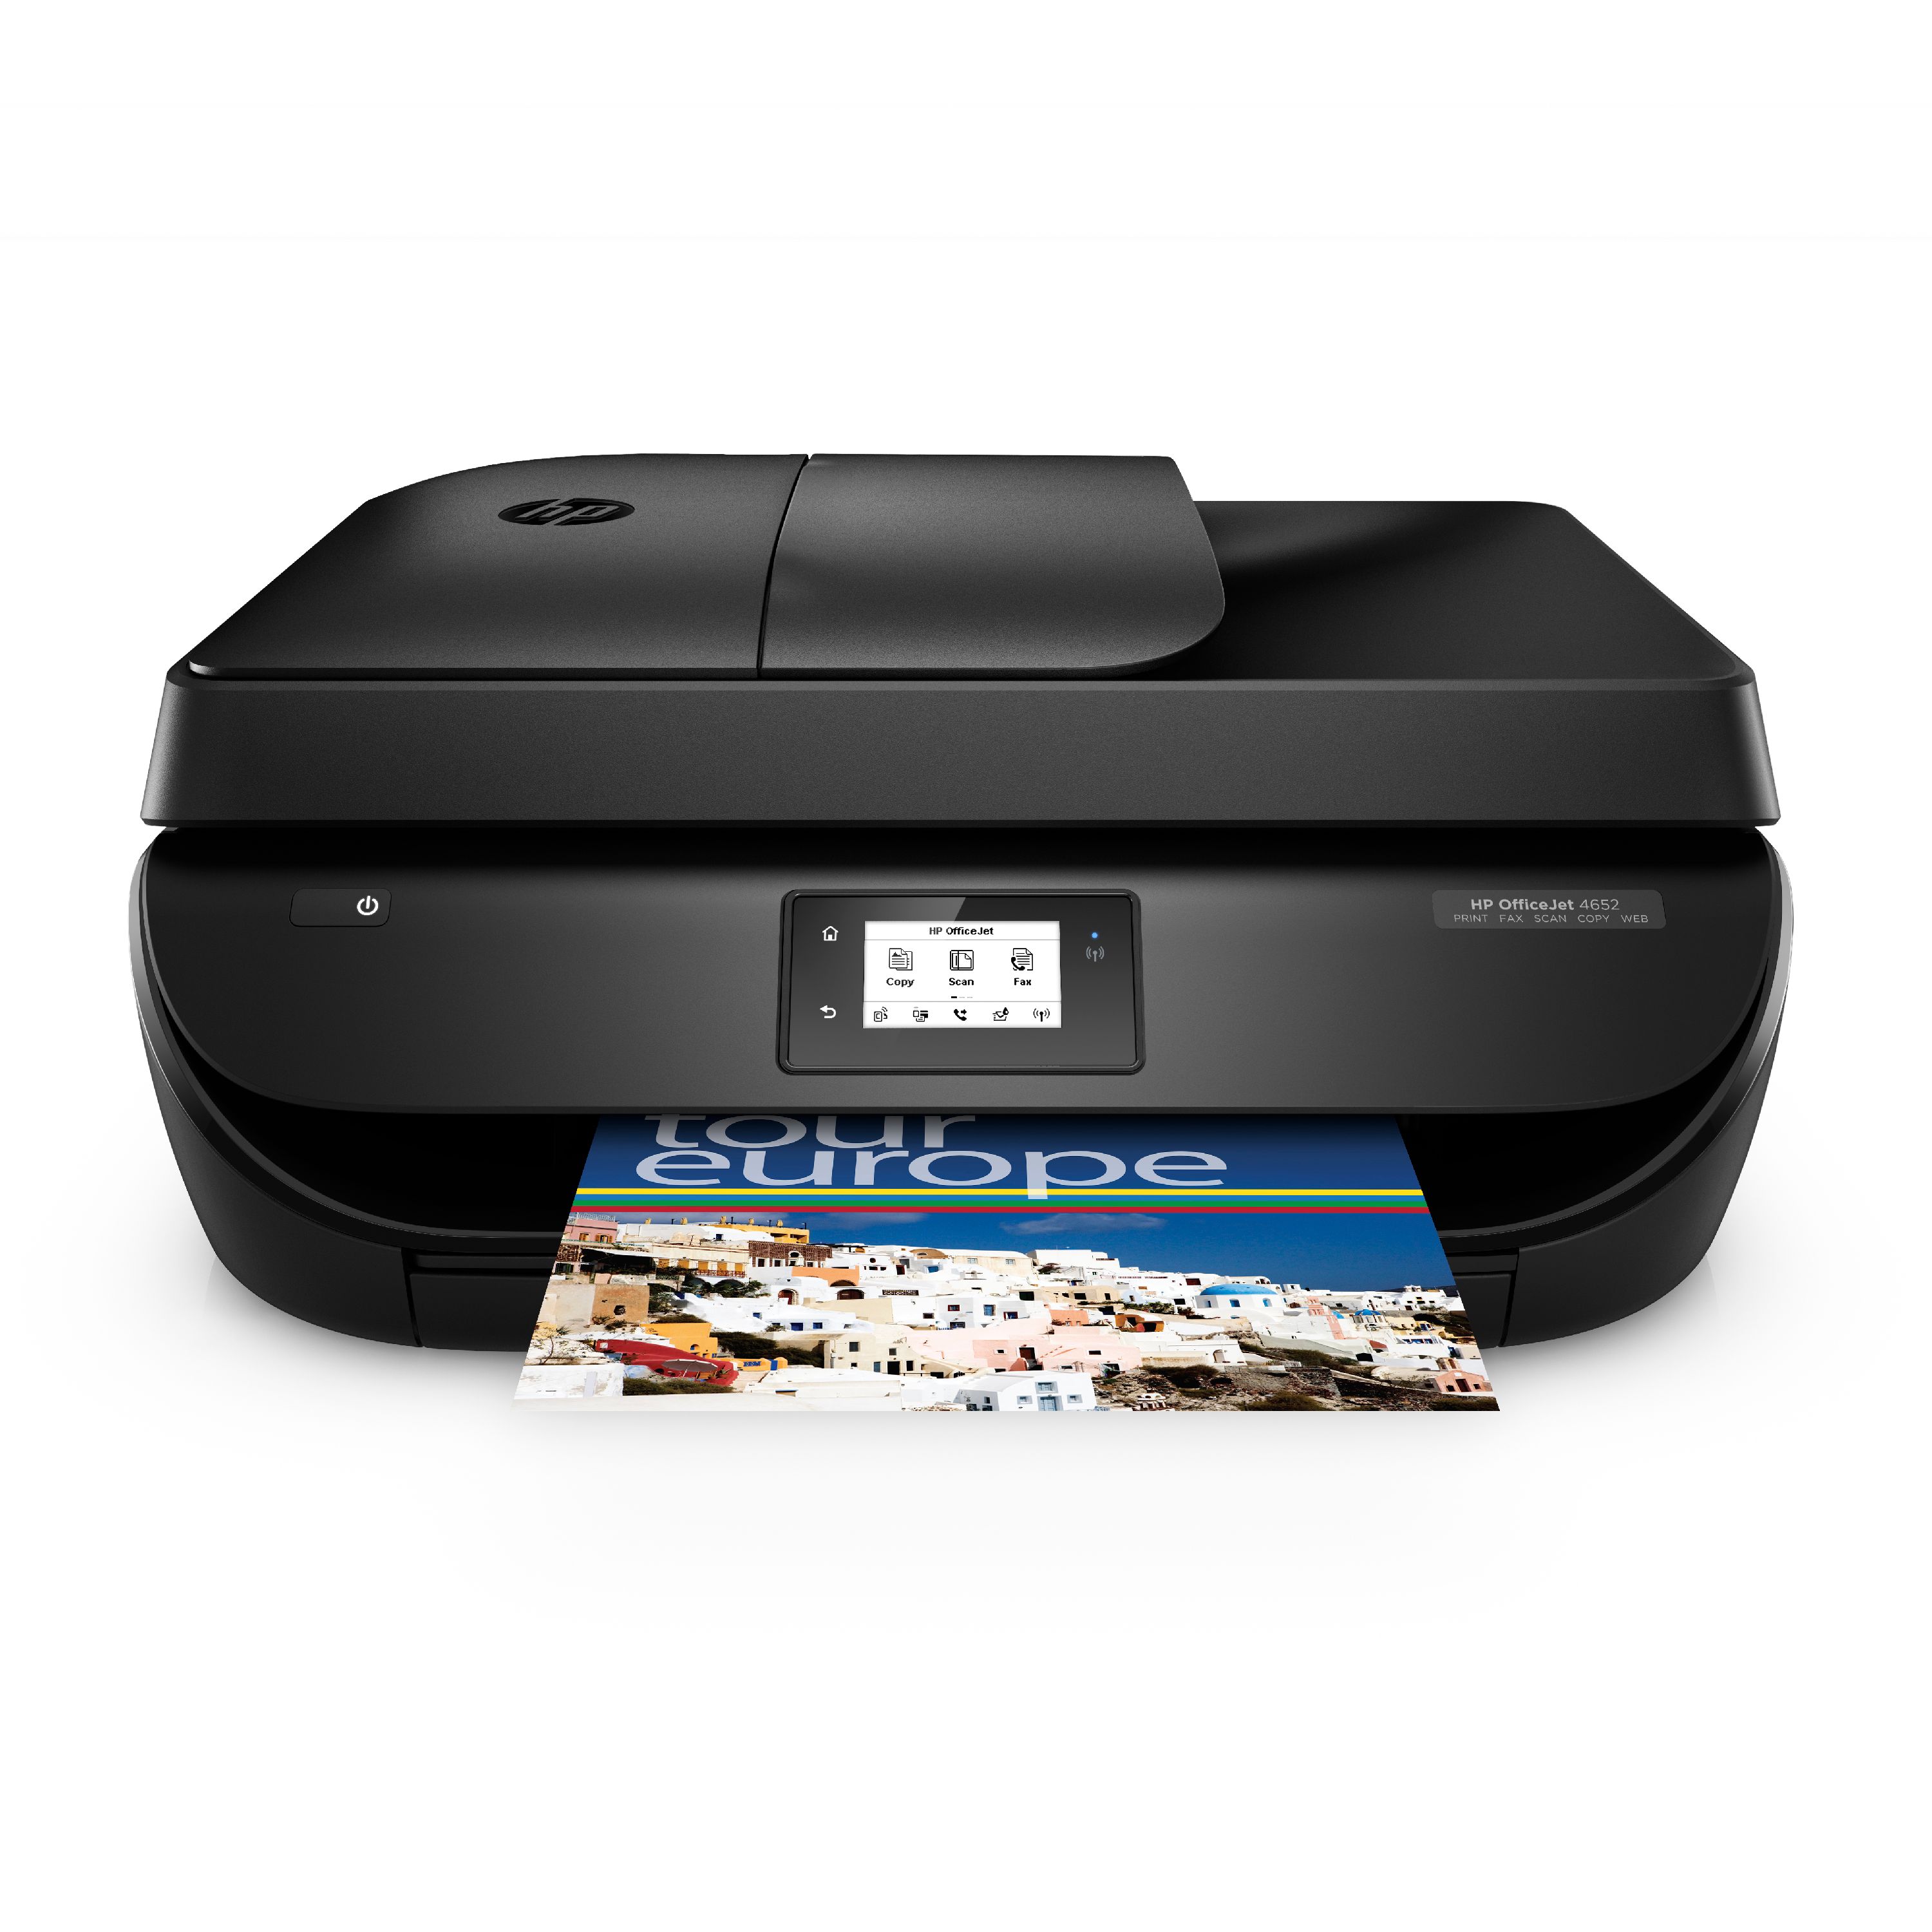 HP Officejet 4652 All-in-One Printer/Copier/Scanner - image 1 of 5